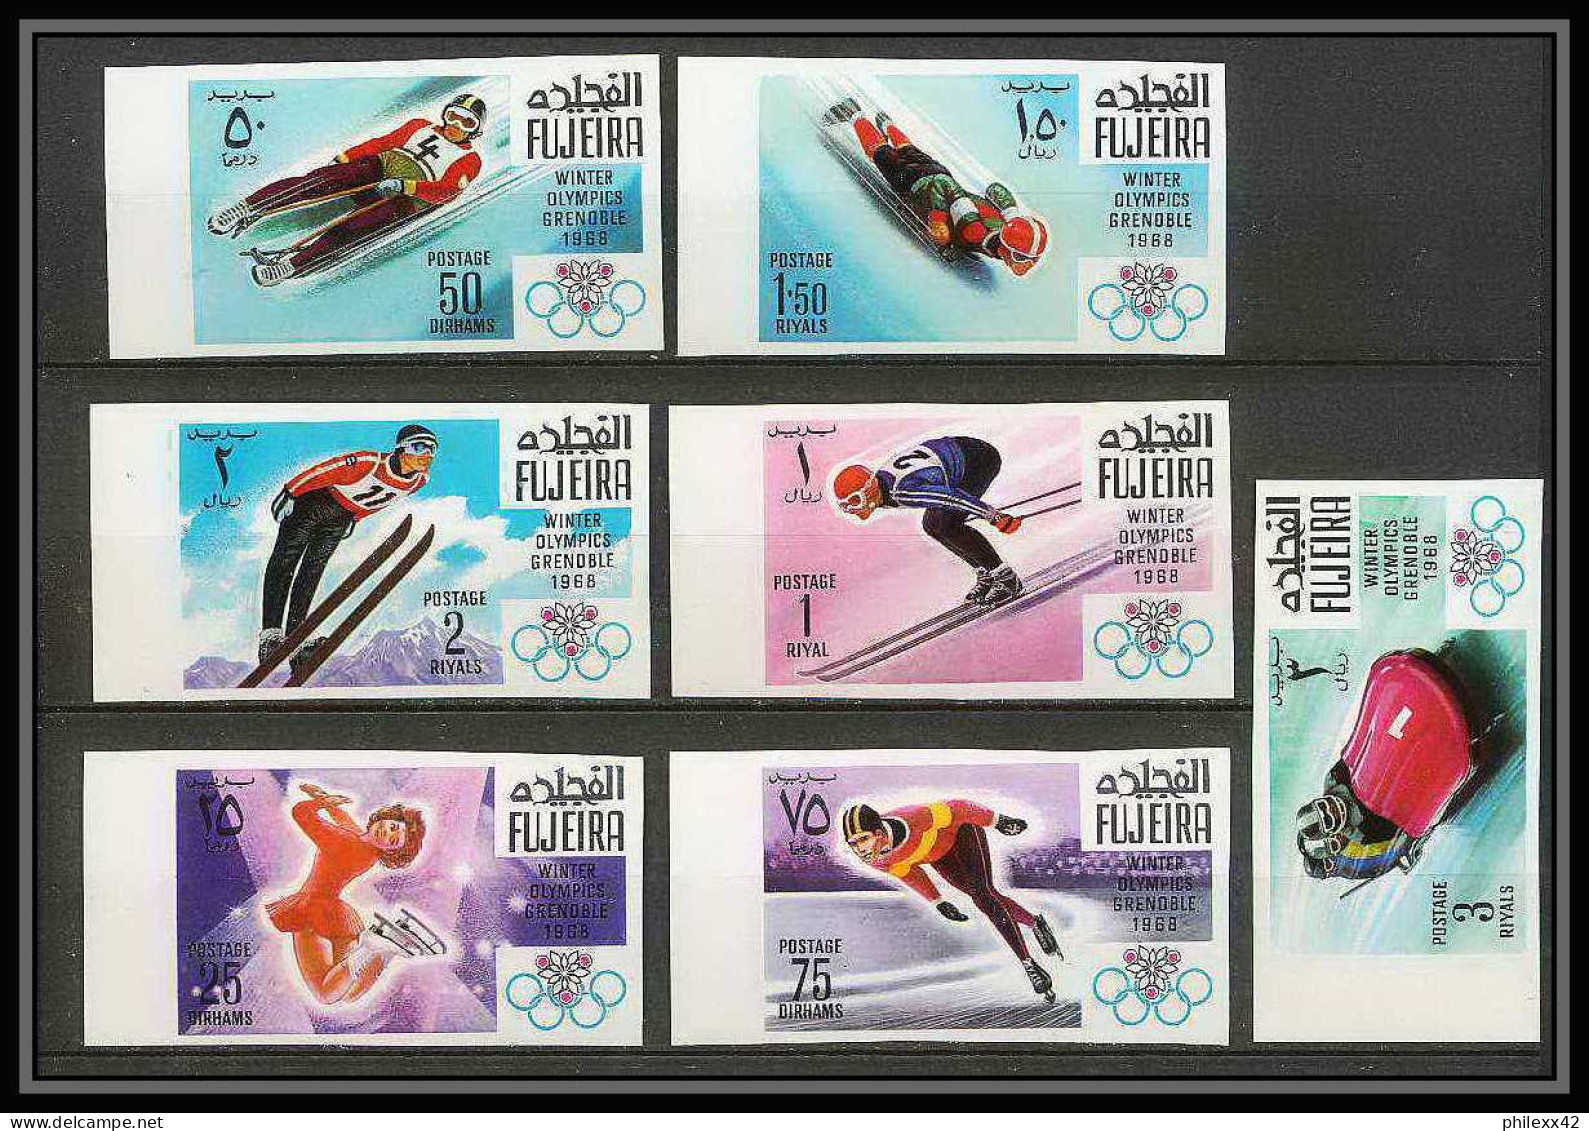 130 - Fujeira MNH ** Mi N° 214 / 220 B Jeux Olympiques (winter Olympic Games) GRENOBLE 1968 Non Dentelé (Imperf) - Hiver 1968: Grenoble